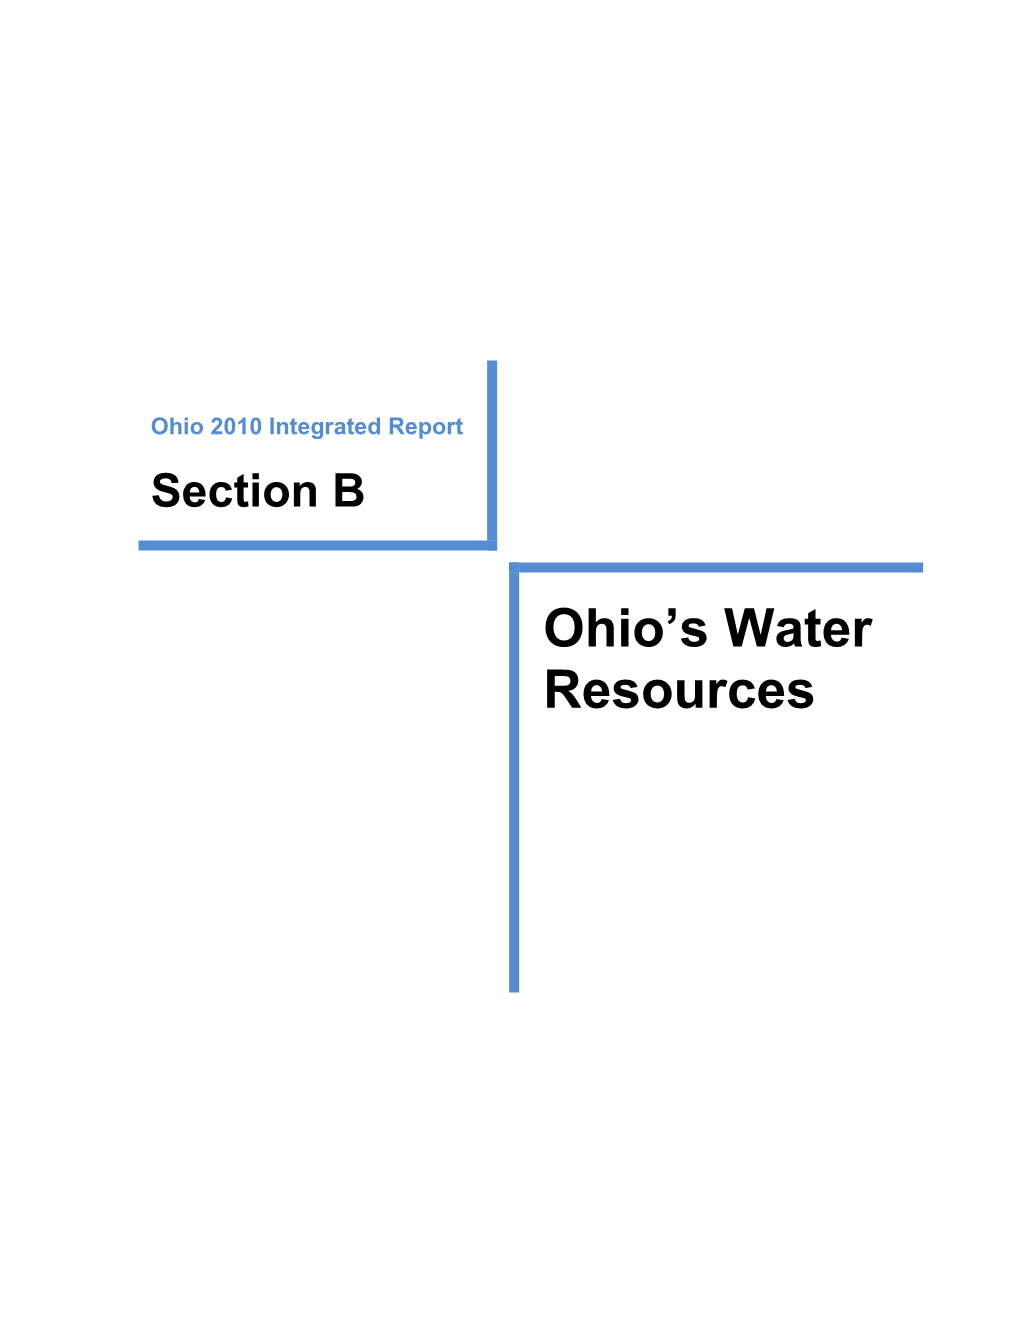 Section B: Ohio's Water Resources